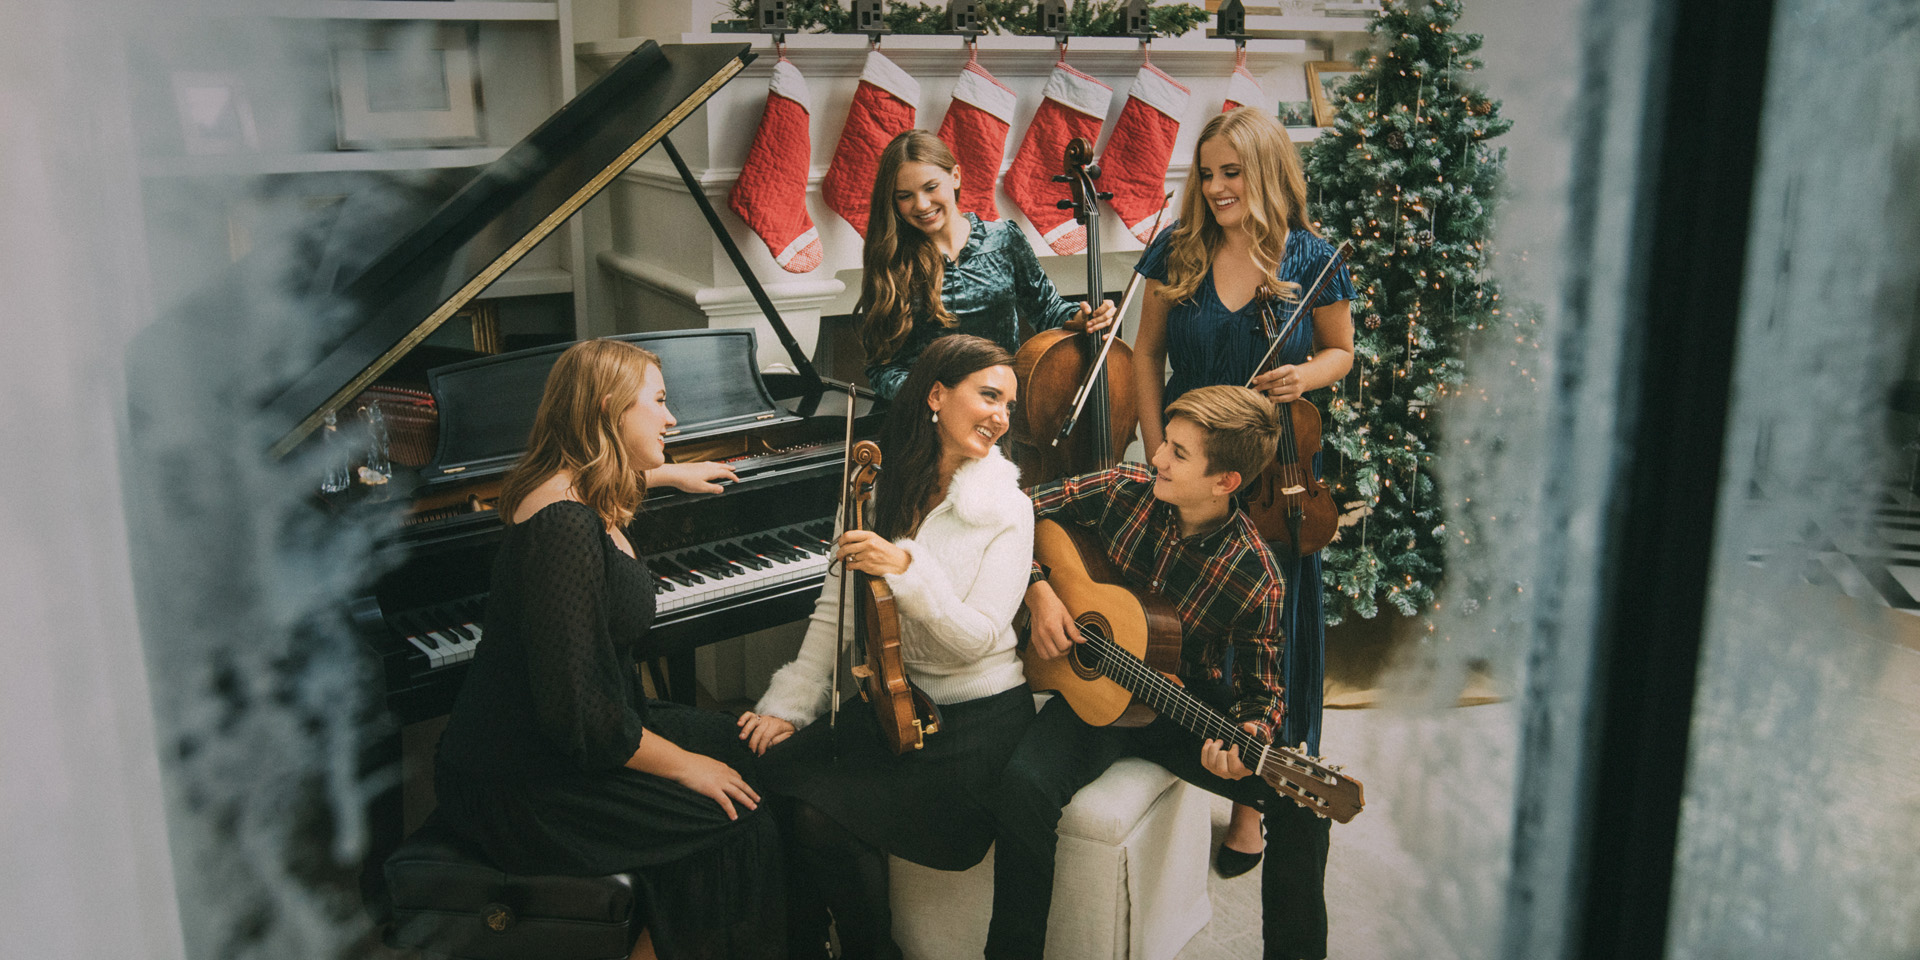 Five people holding string instruments sit at a piano